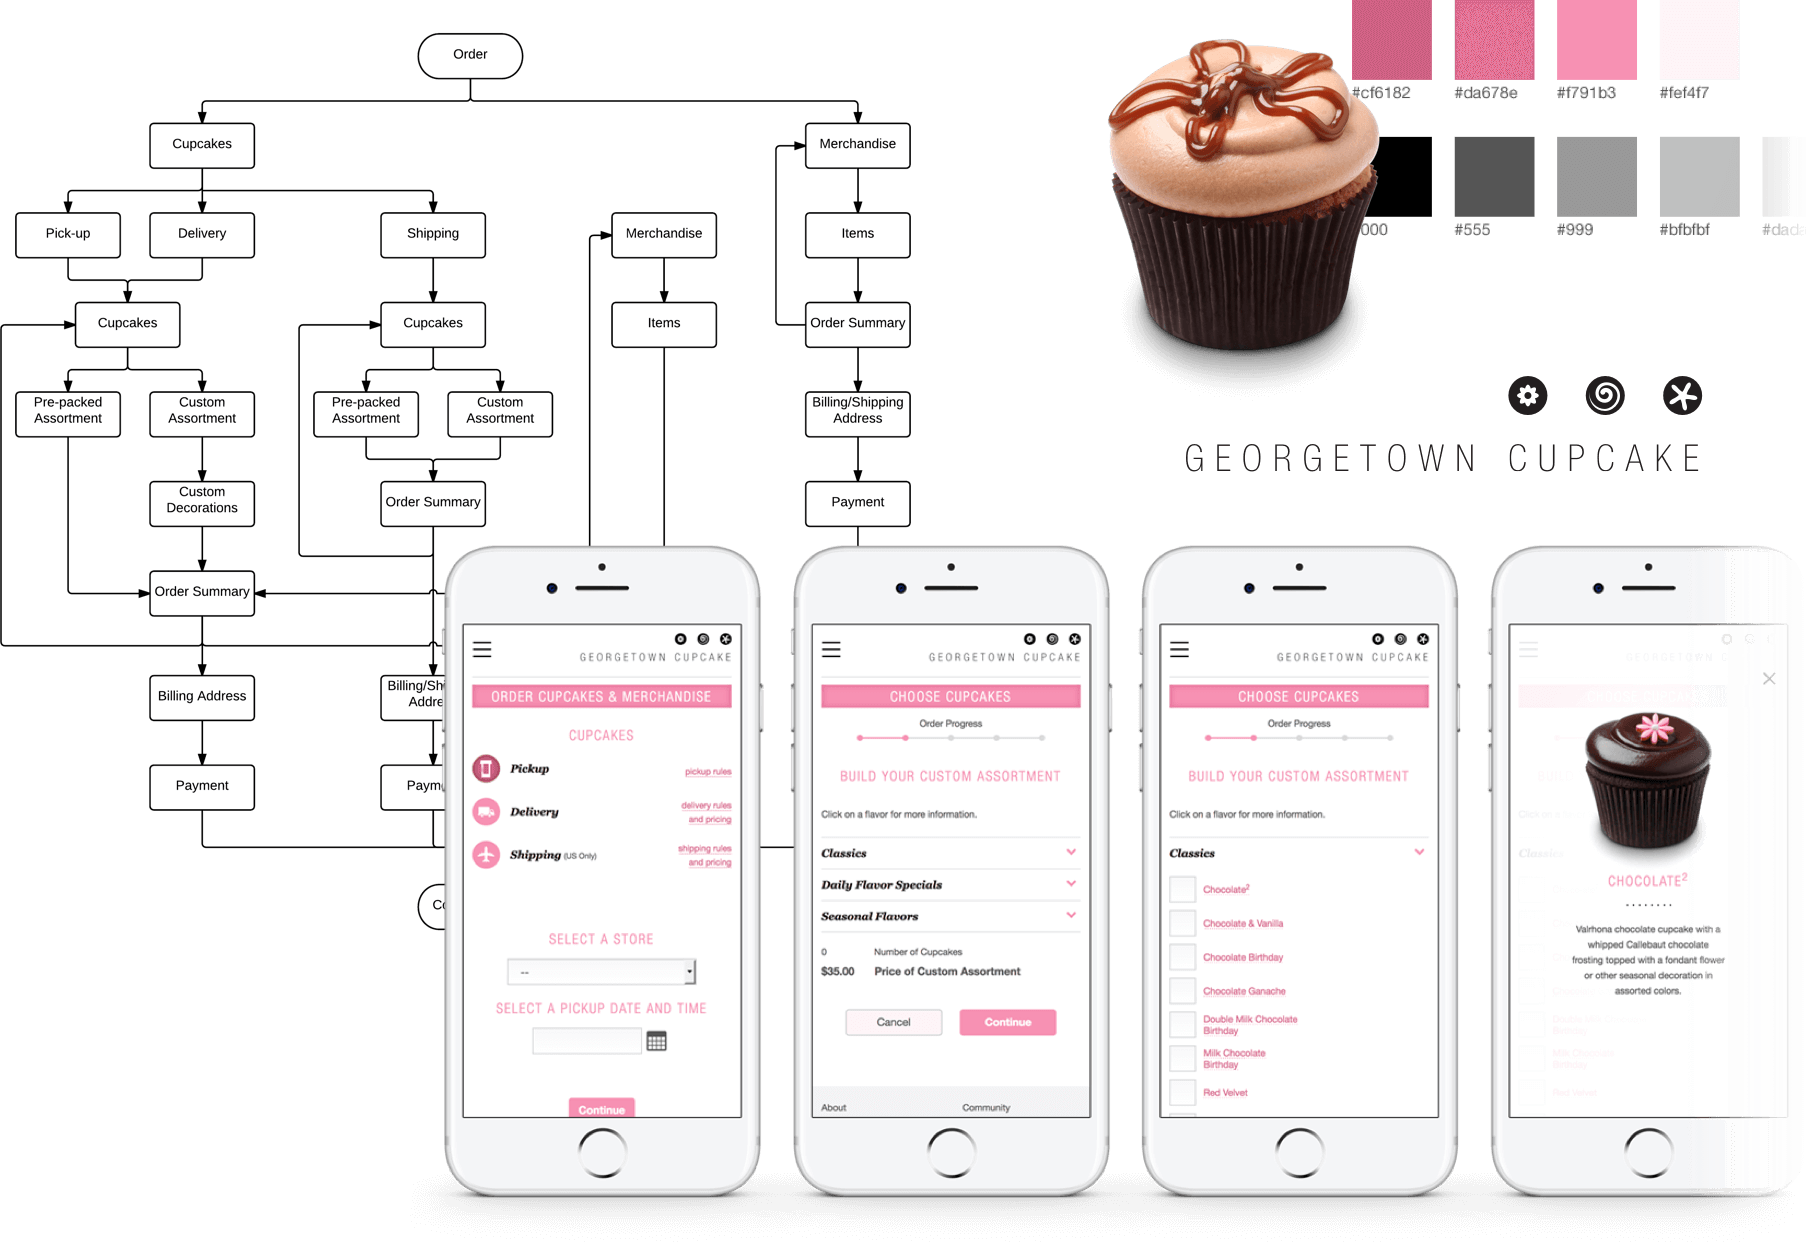 Georgetown Cupcake website, order system, and brand design